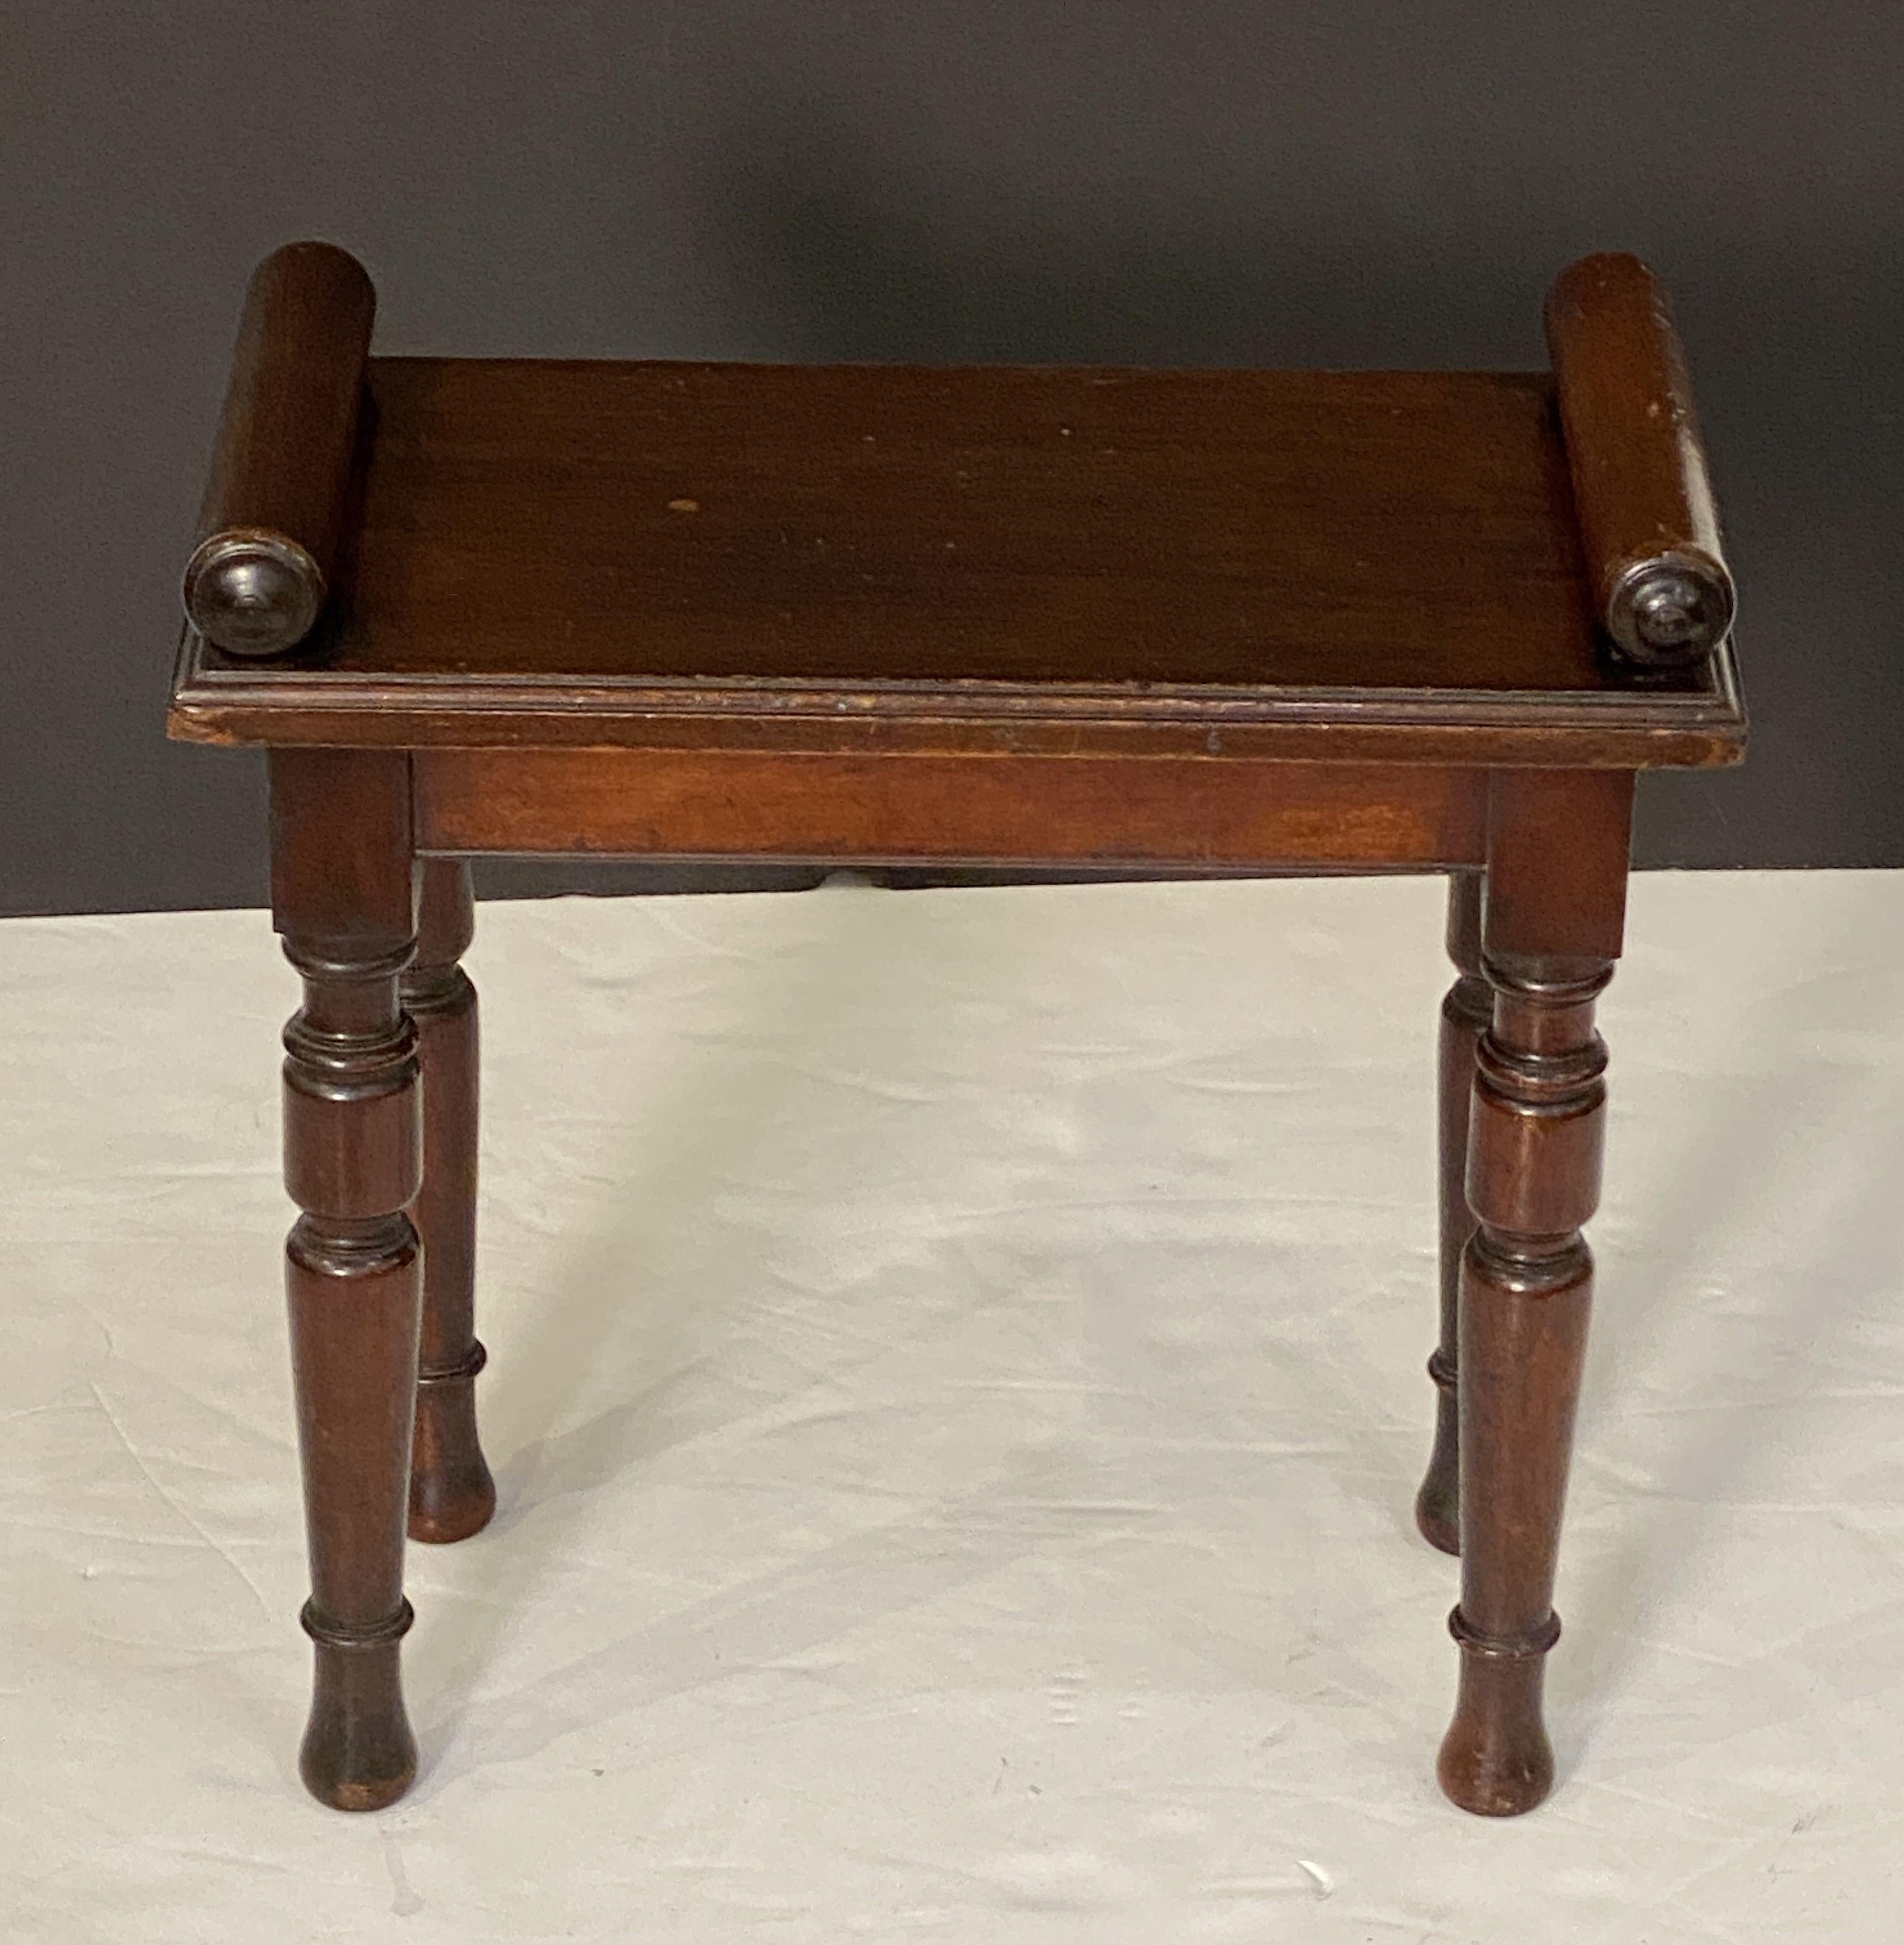 Stained Small English Hall Bench or Window Seat of Mahogany on Turned Legs